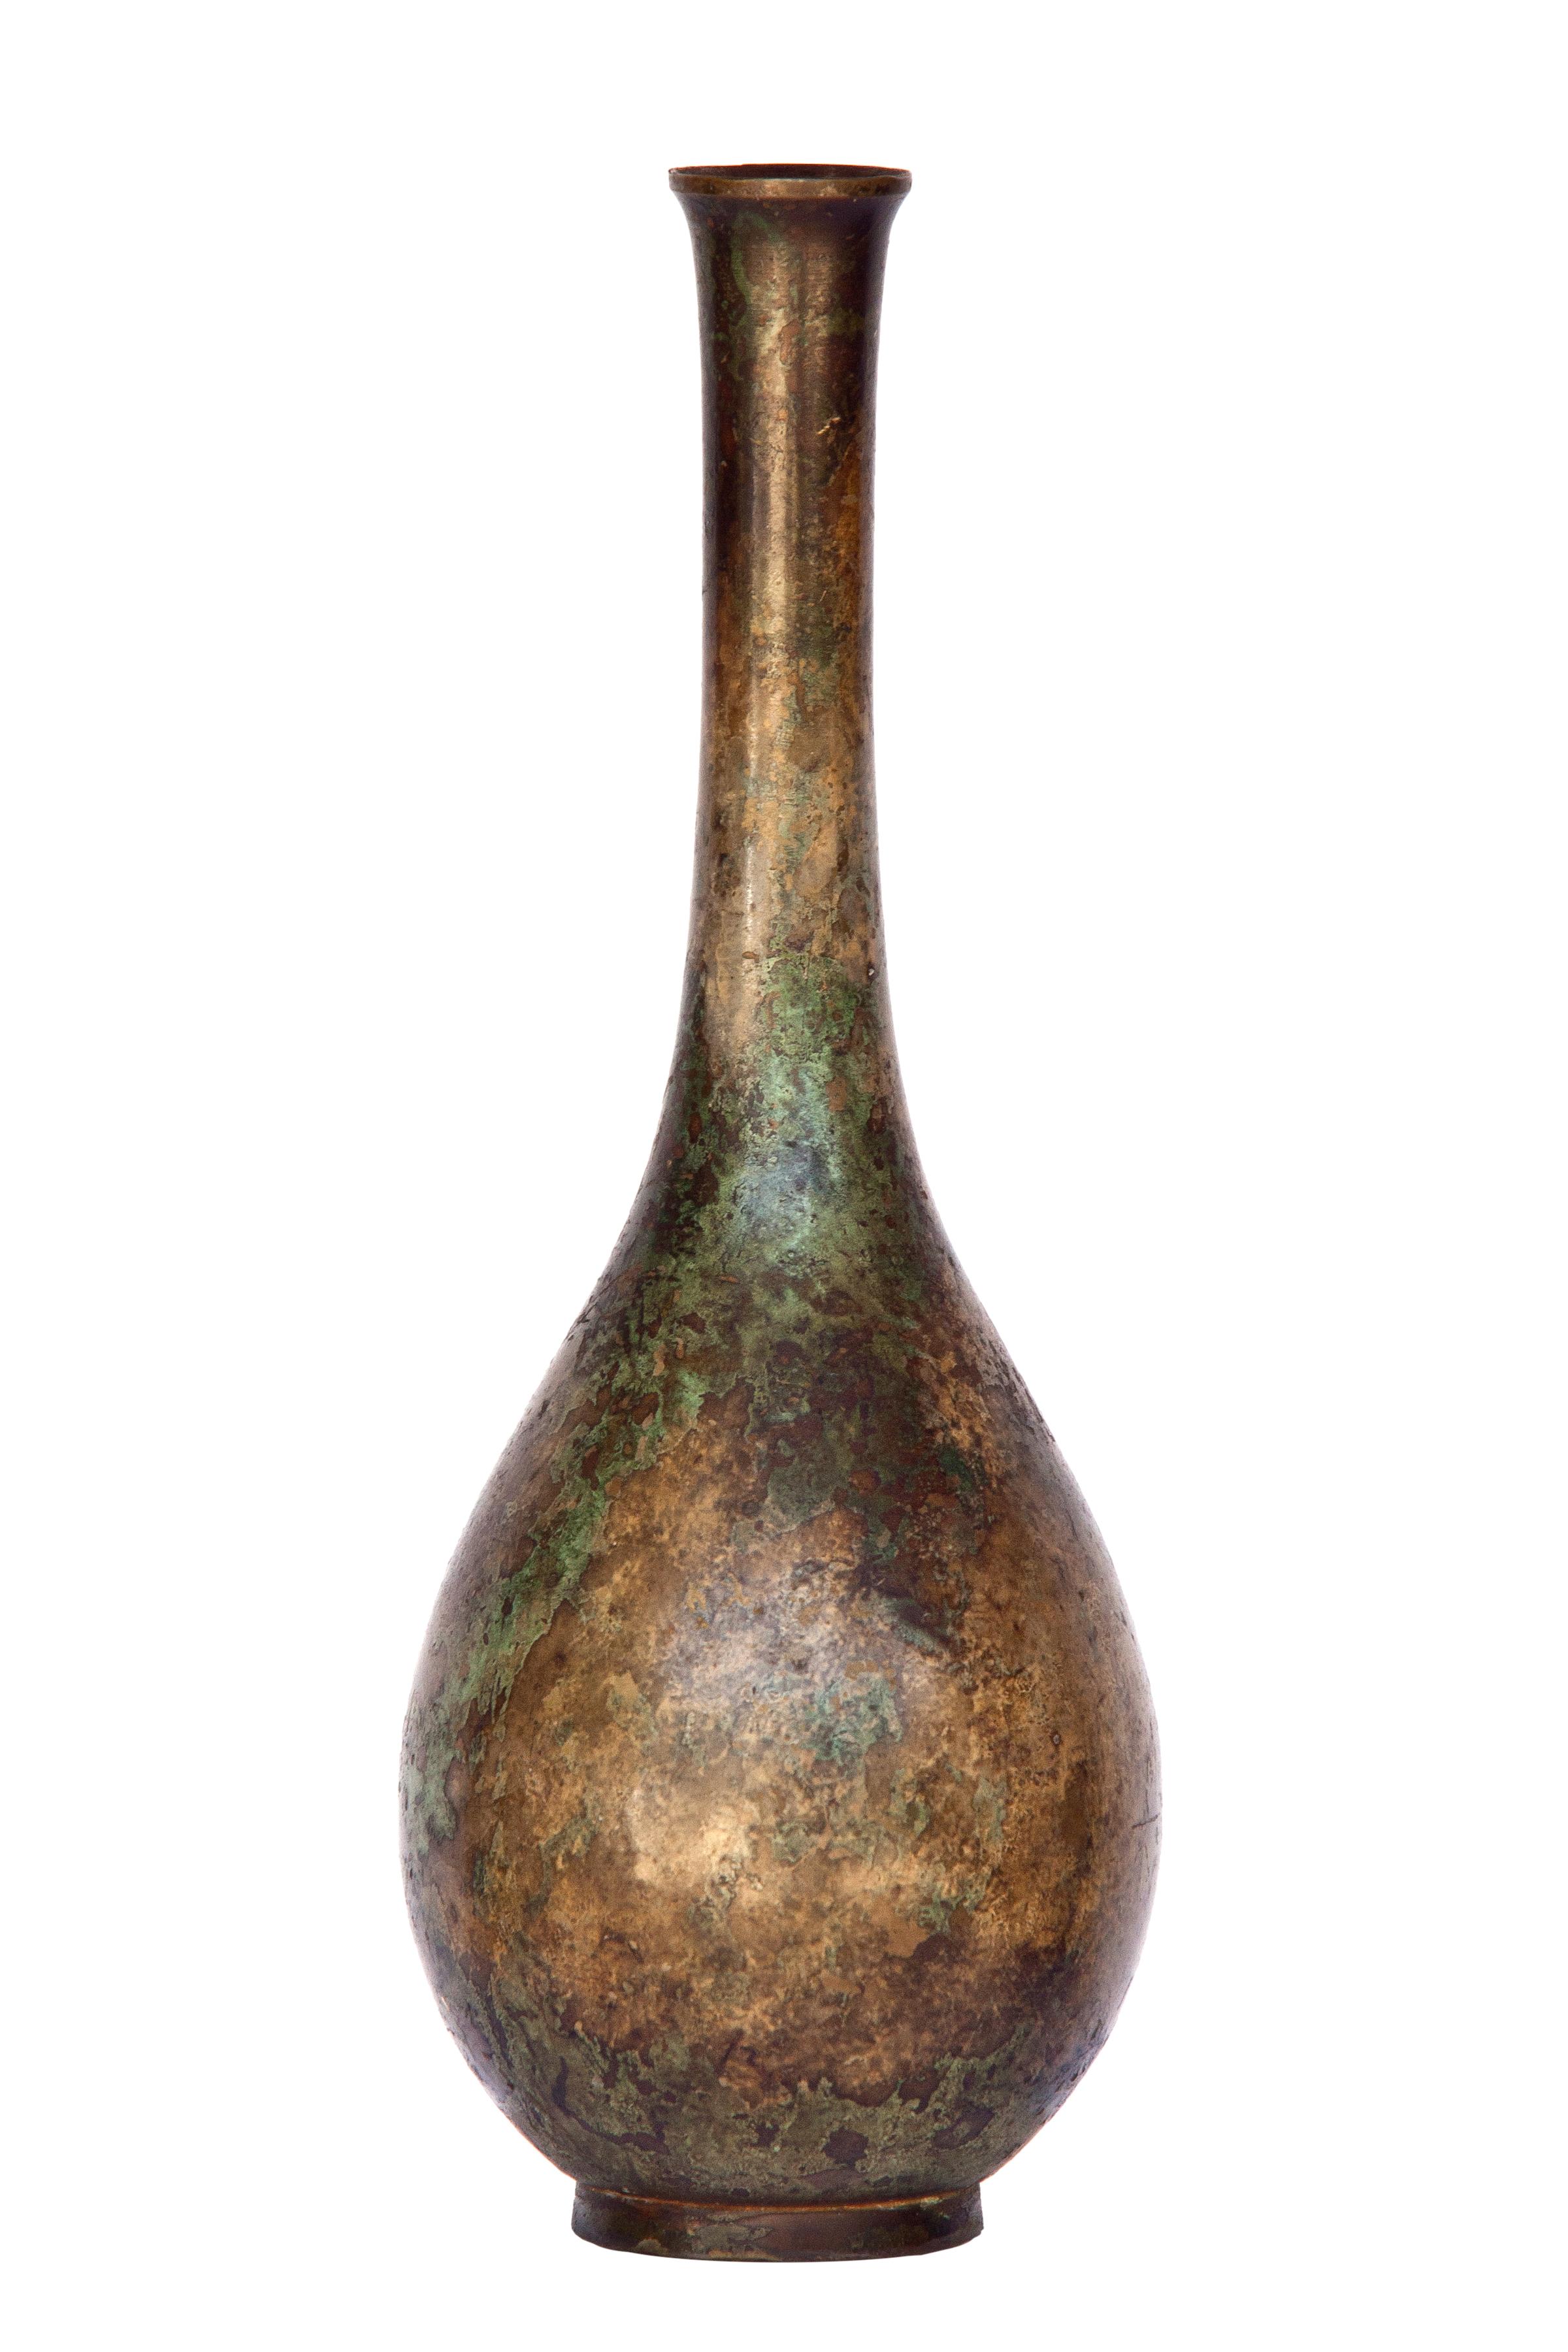 Petite 1960's Japanese bronze bud vase with dramatic texture & created with chemical etching & patinas. no maker's mark.